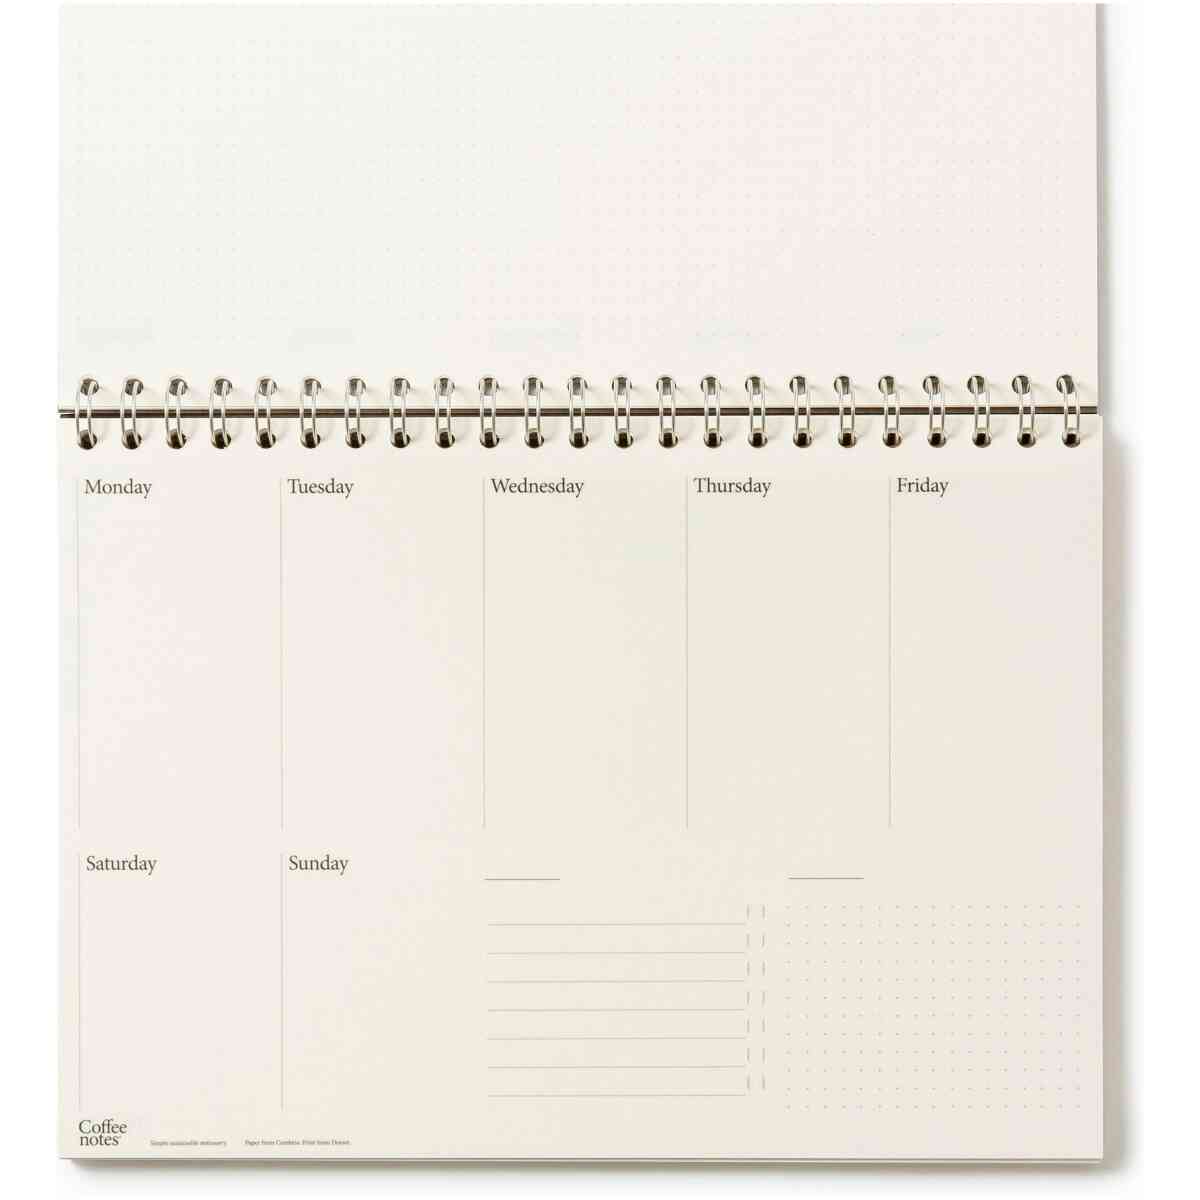 Planners 7day text 0bd141ab be19 413e 95e0 7b277b2a995c